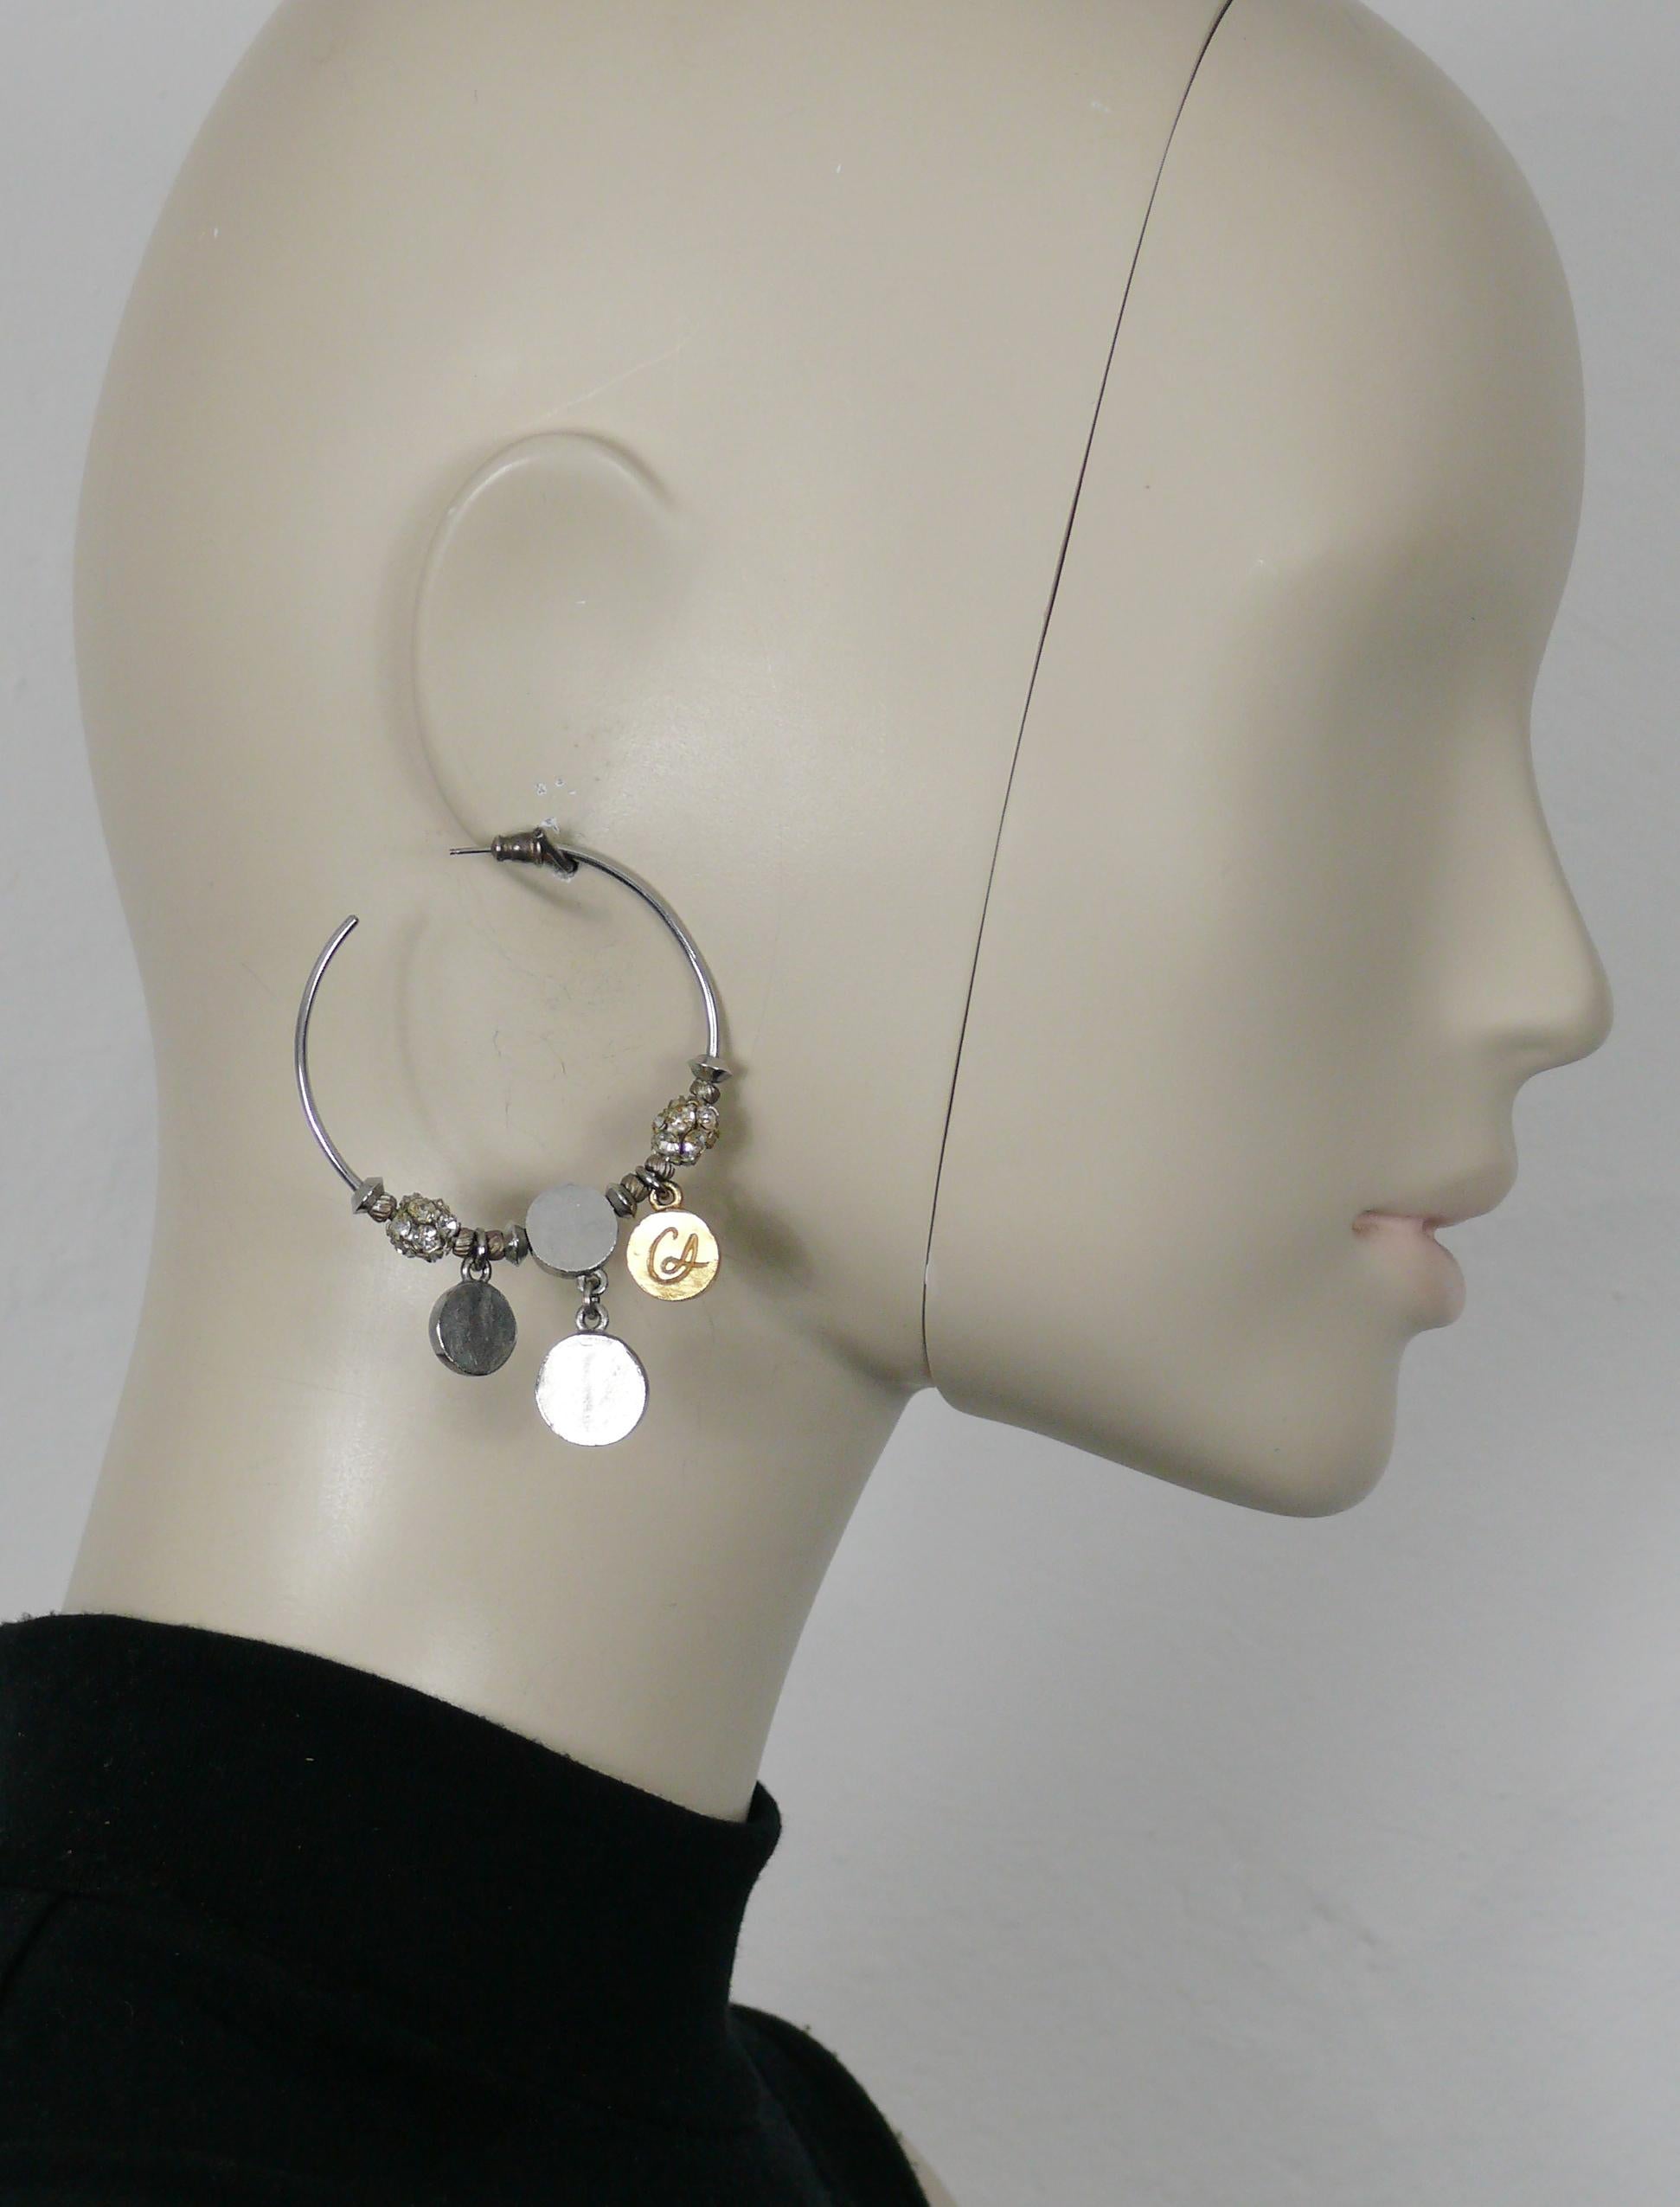 CHRISTIAN LACROIX vintage silver tone hoop earrings (for pierced ears) embellished with clear crystal balls, silver tone and gold tone charms (one embossed with the CL monogram), metal beads.

Unmarked (embossed CL on the gold tone